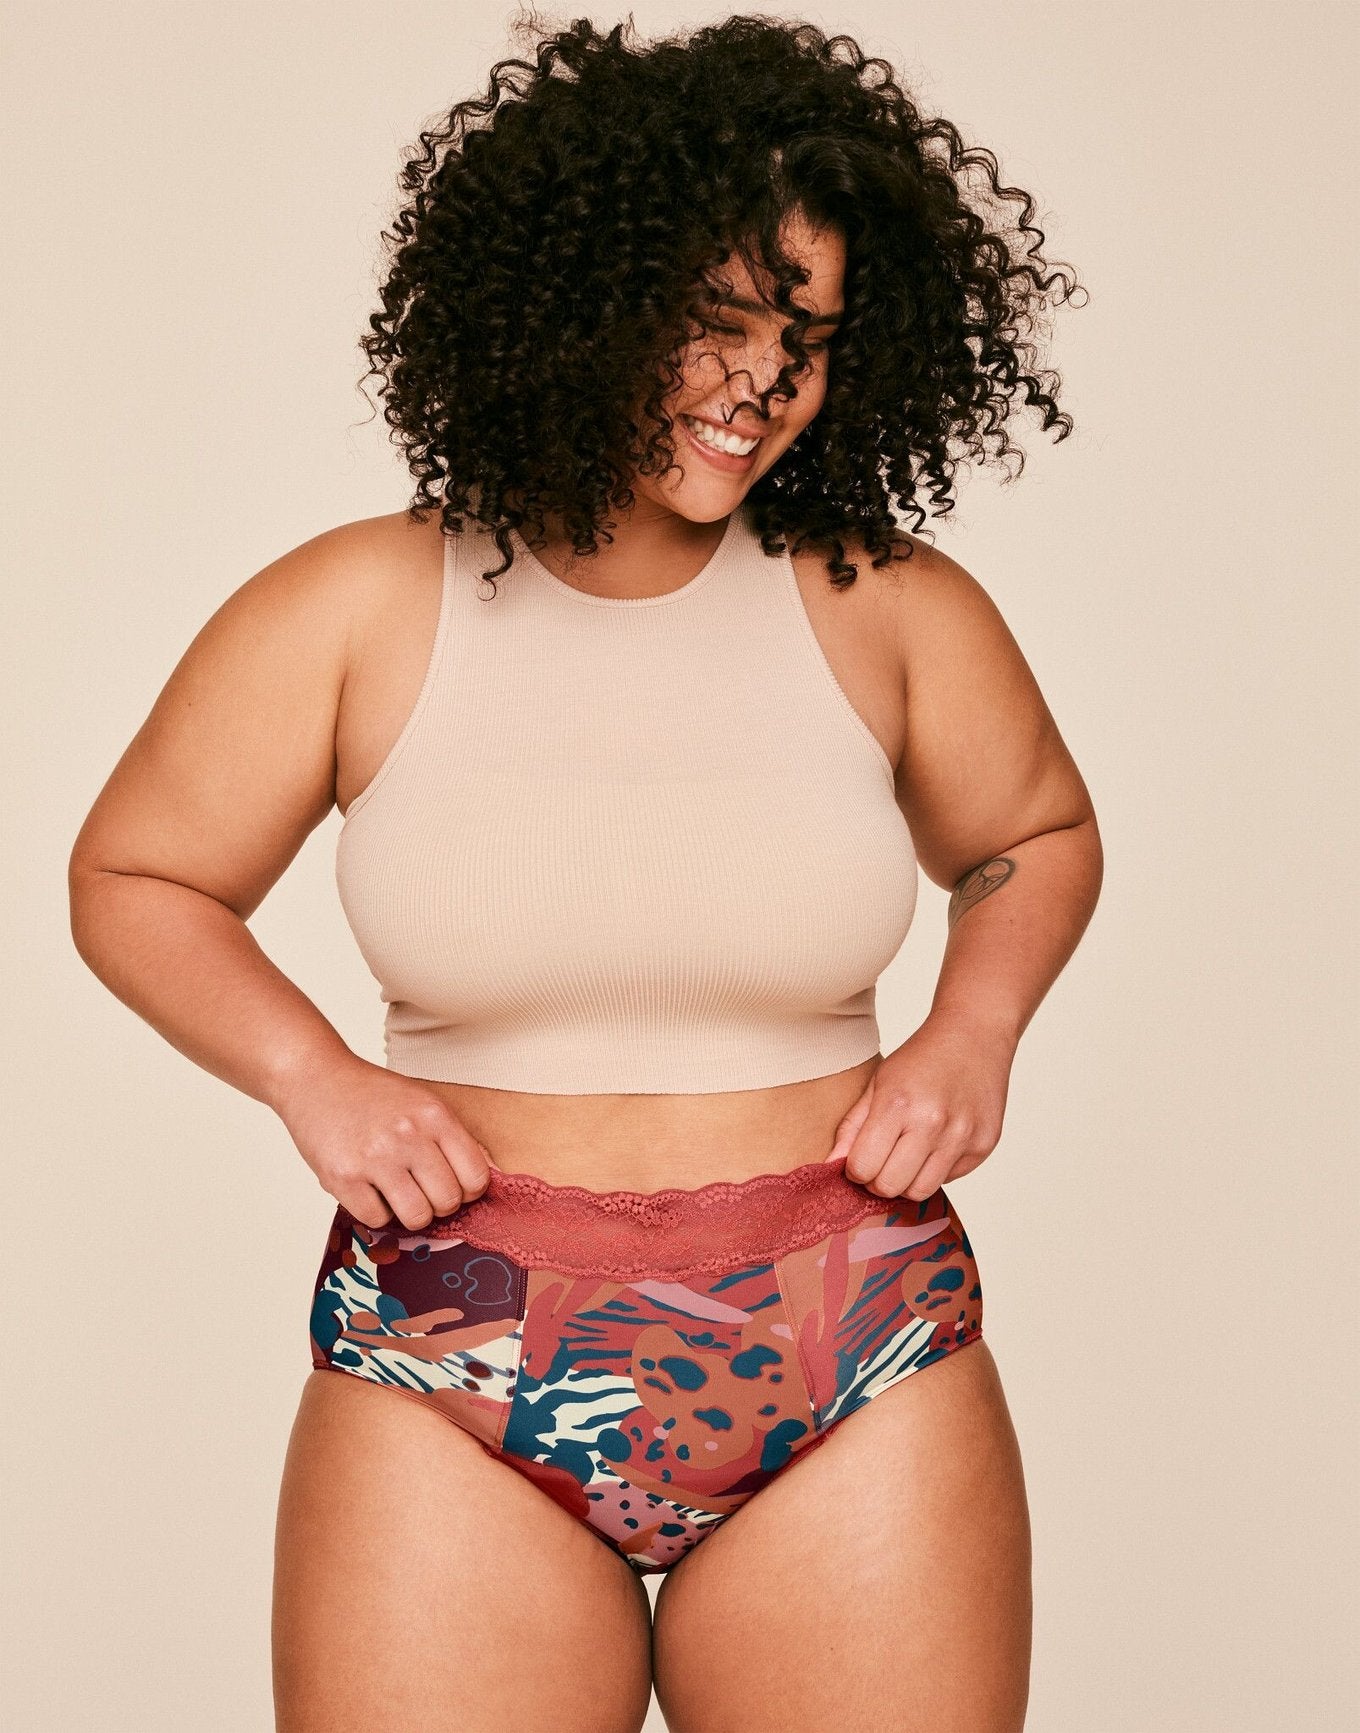 Joyja Amelia period-proof panty in color Wild Heart C01 and shape high waisted